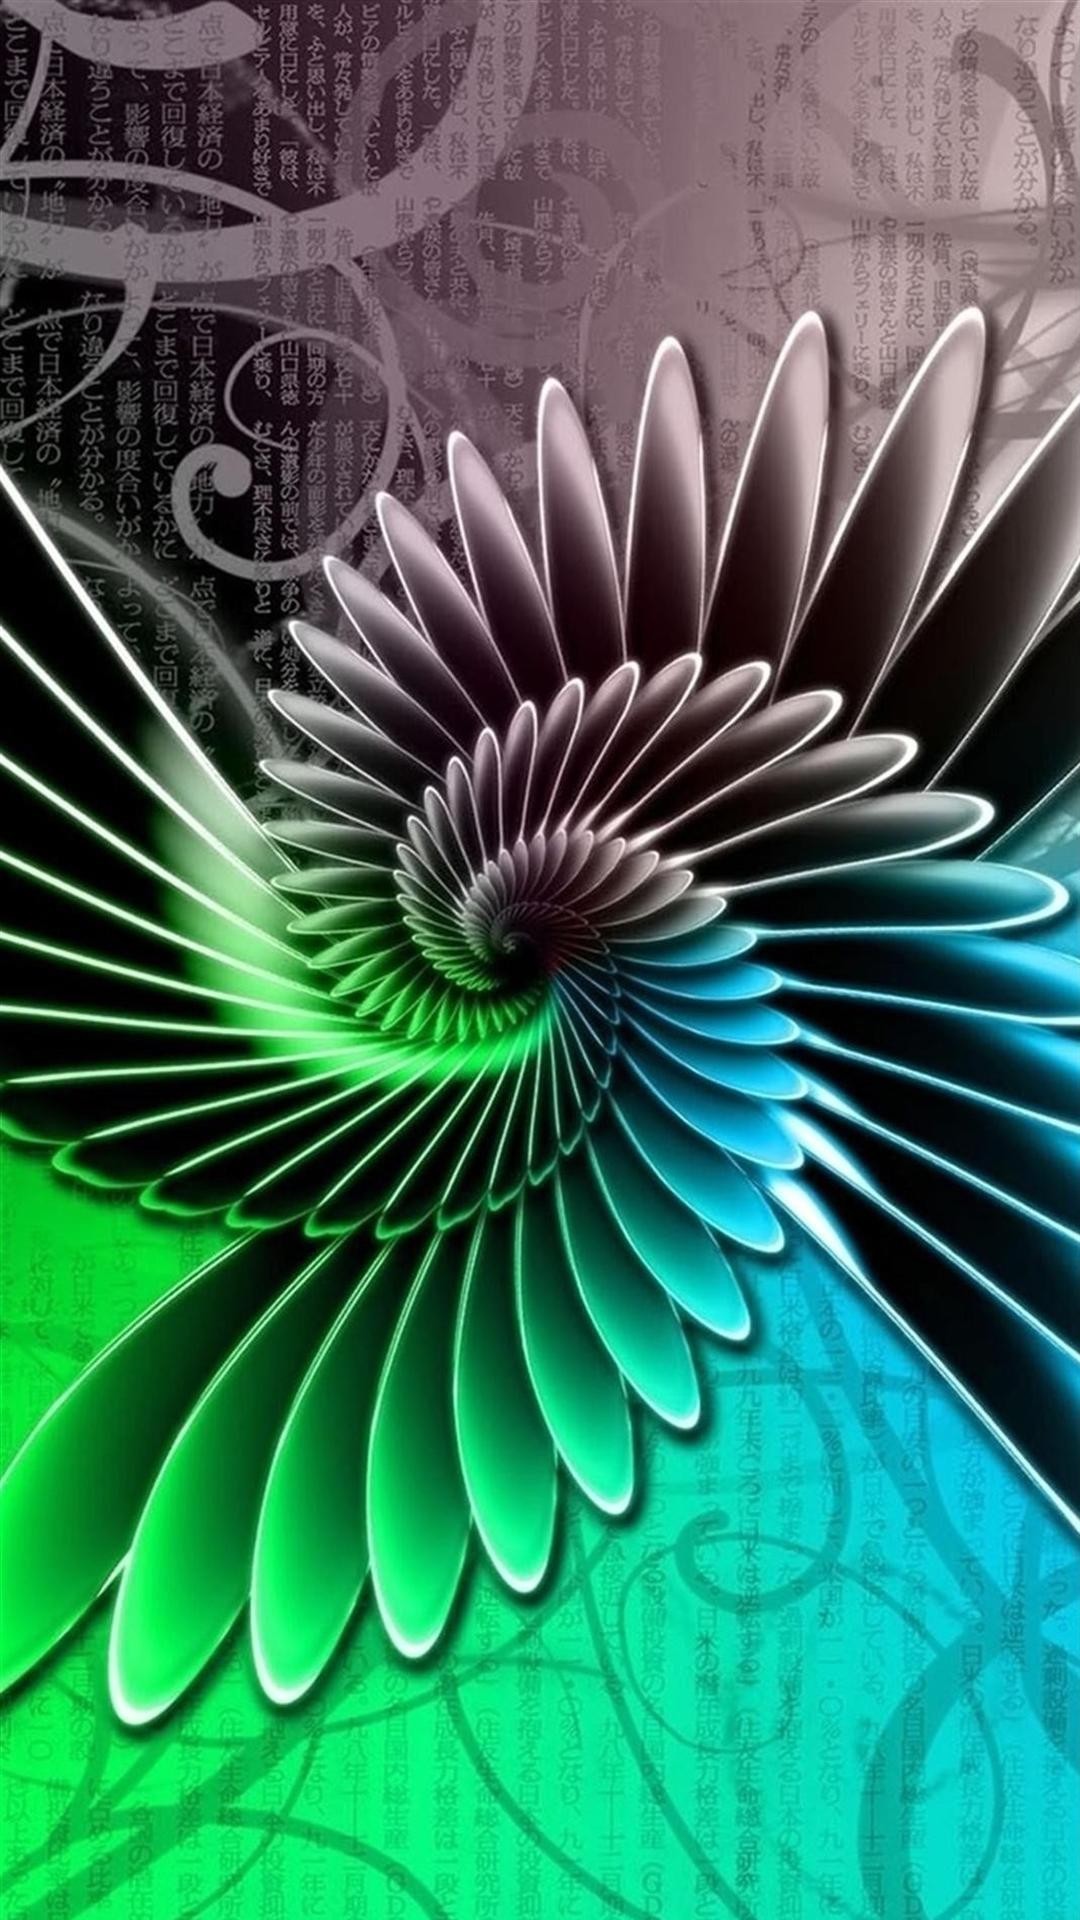 1080x1920 ... free lg cell phone wallpapers wallpapersafari; abstract mobile  wallpapers wallpapersafari ...